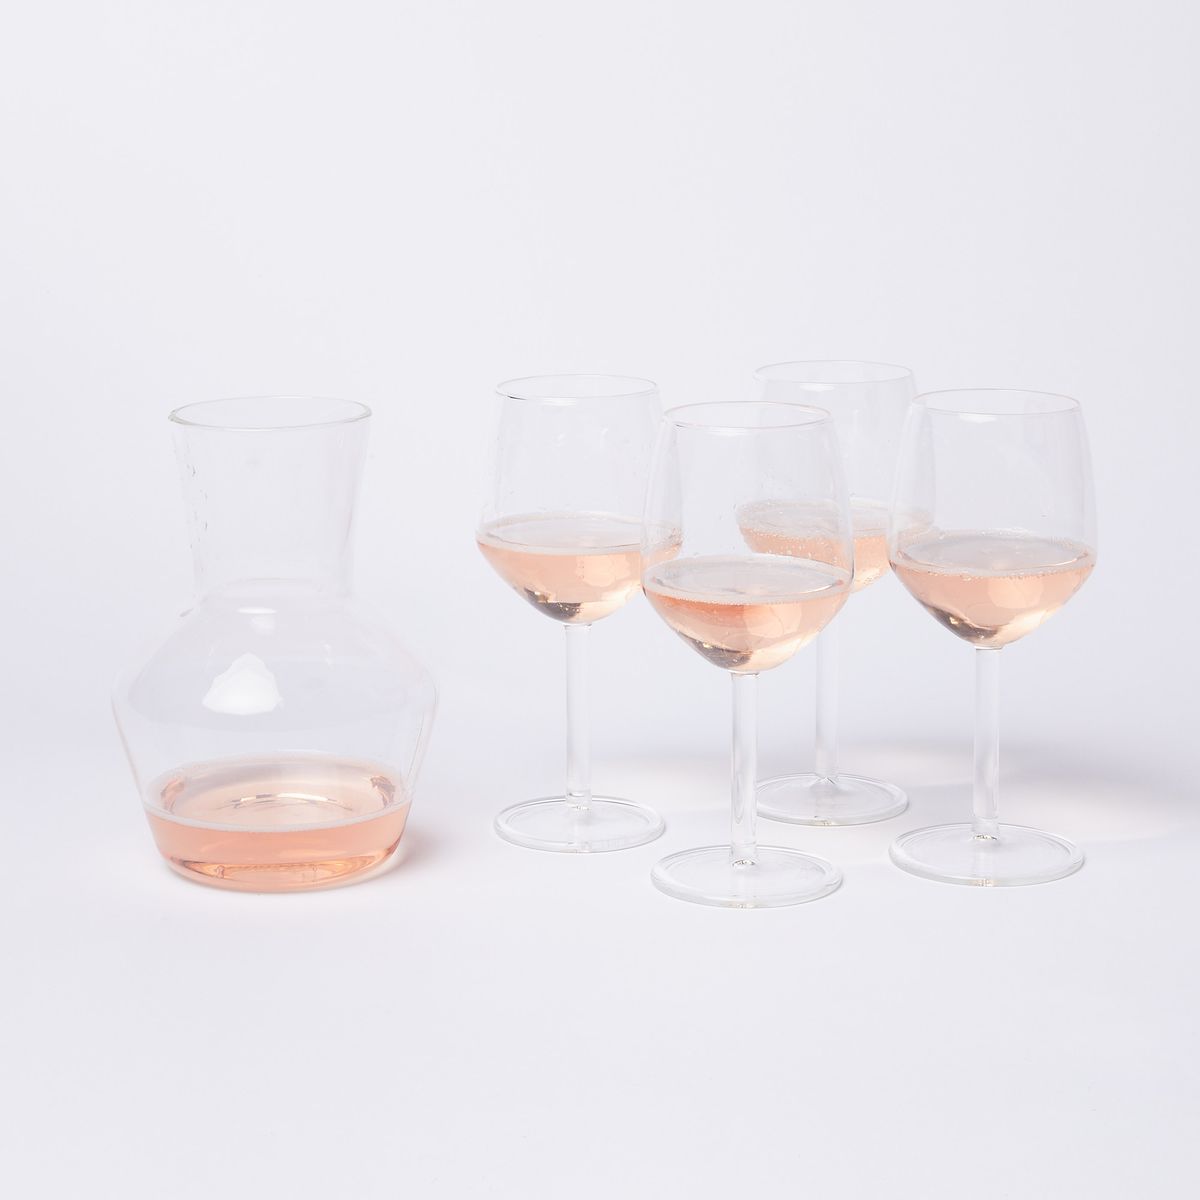 4 wine glasses and a carafe with rose